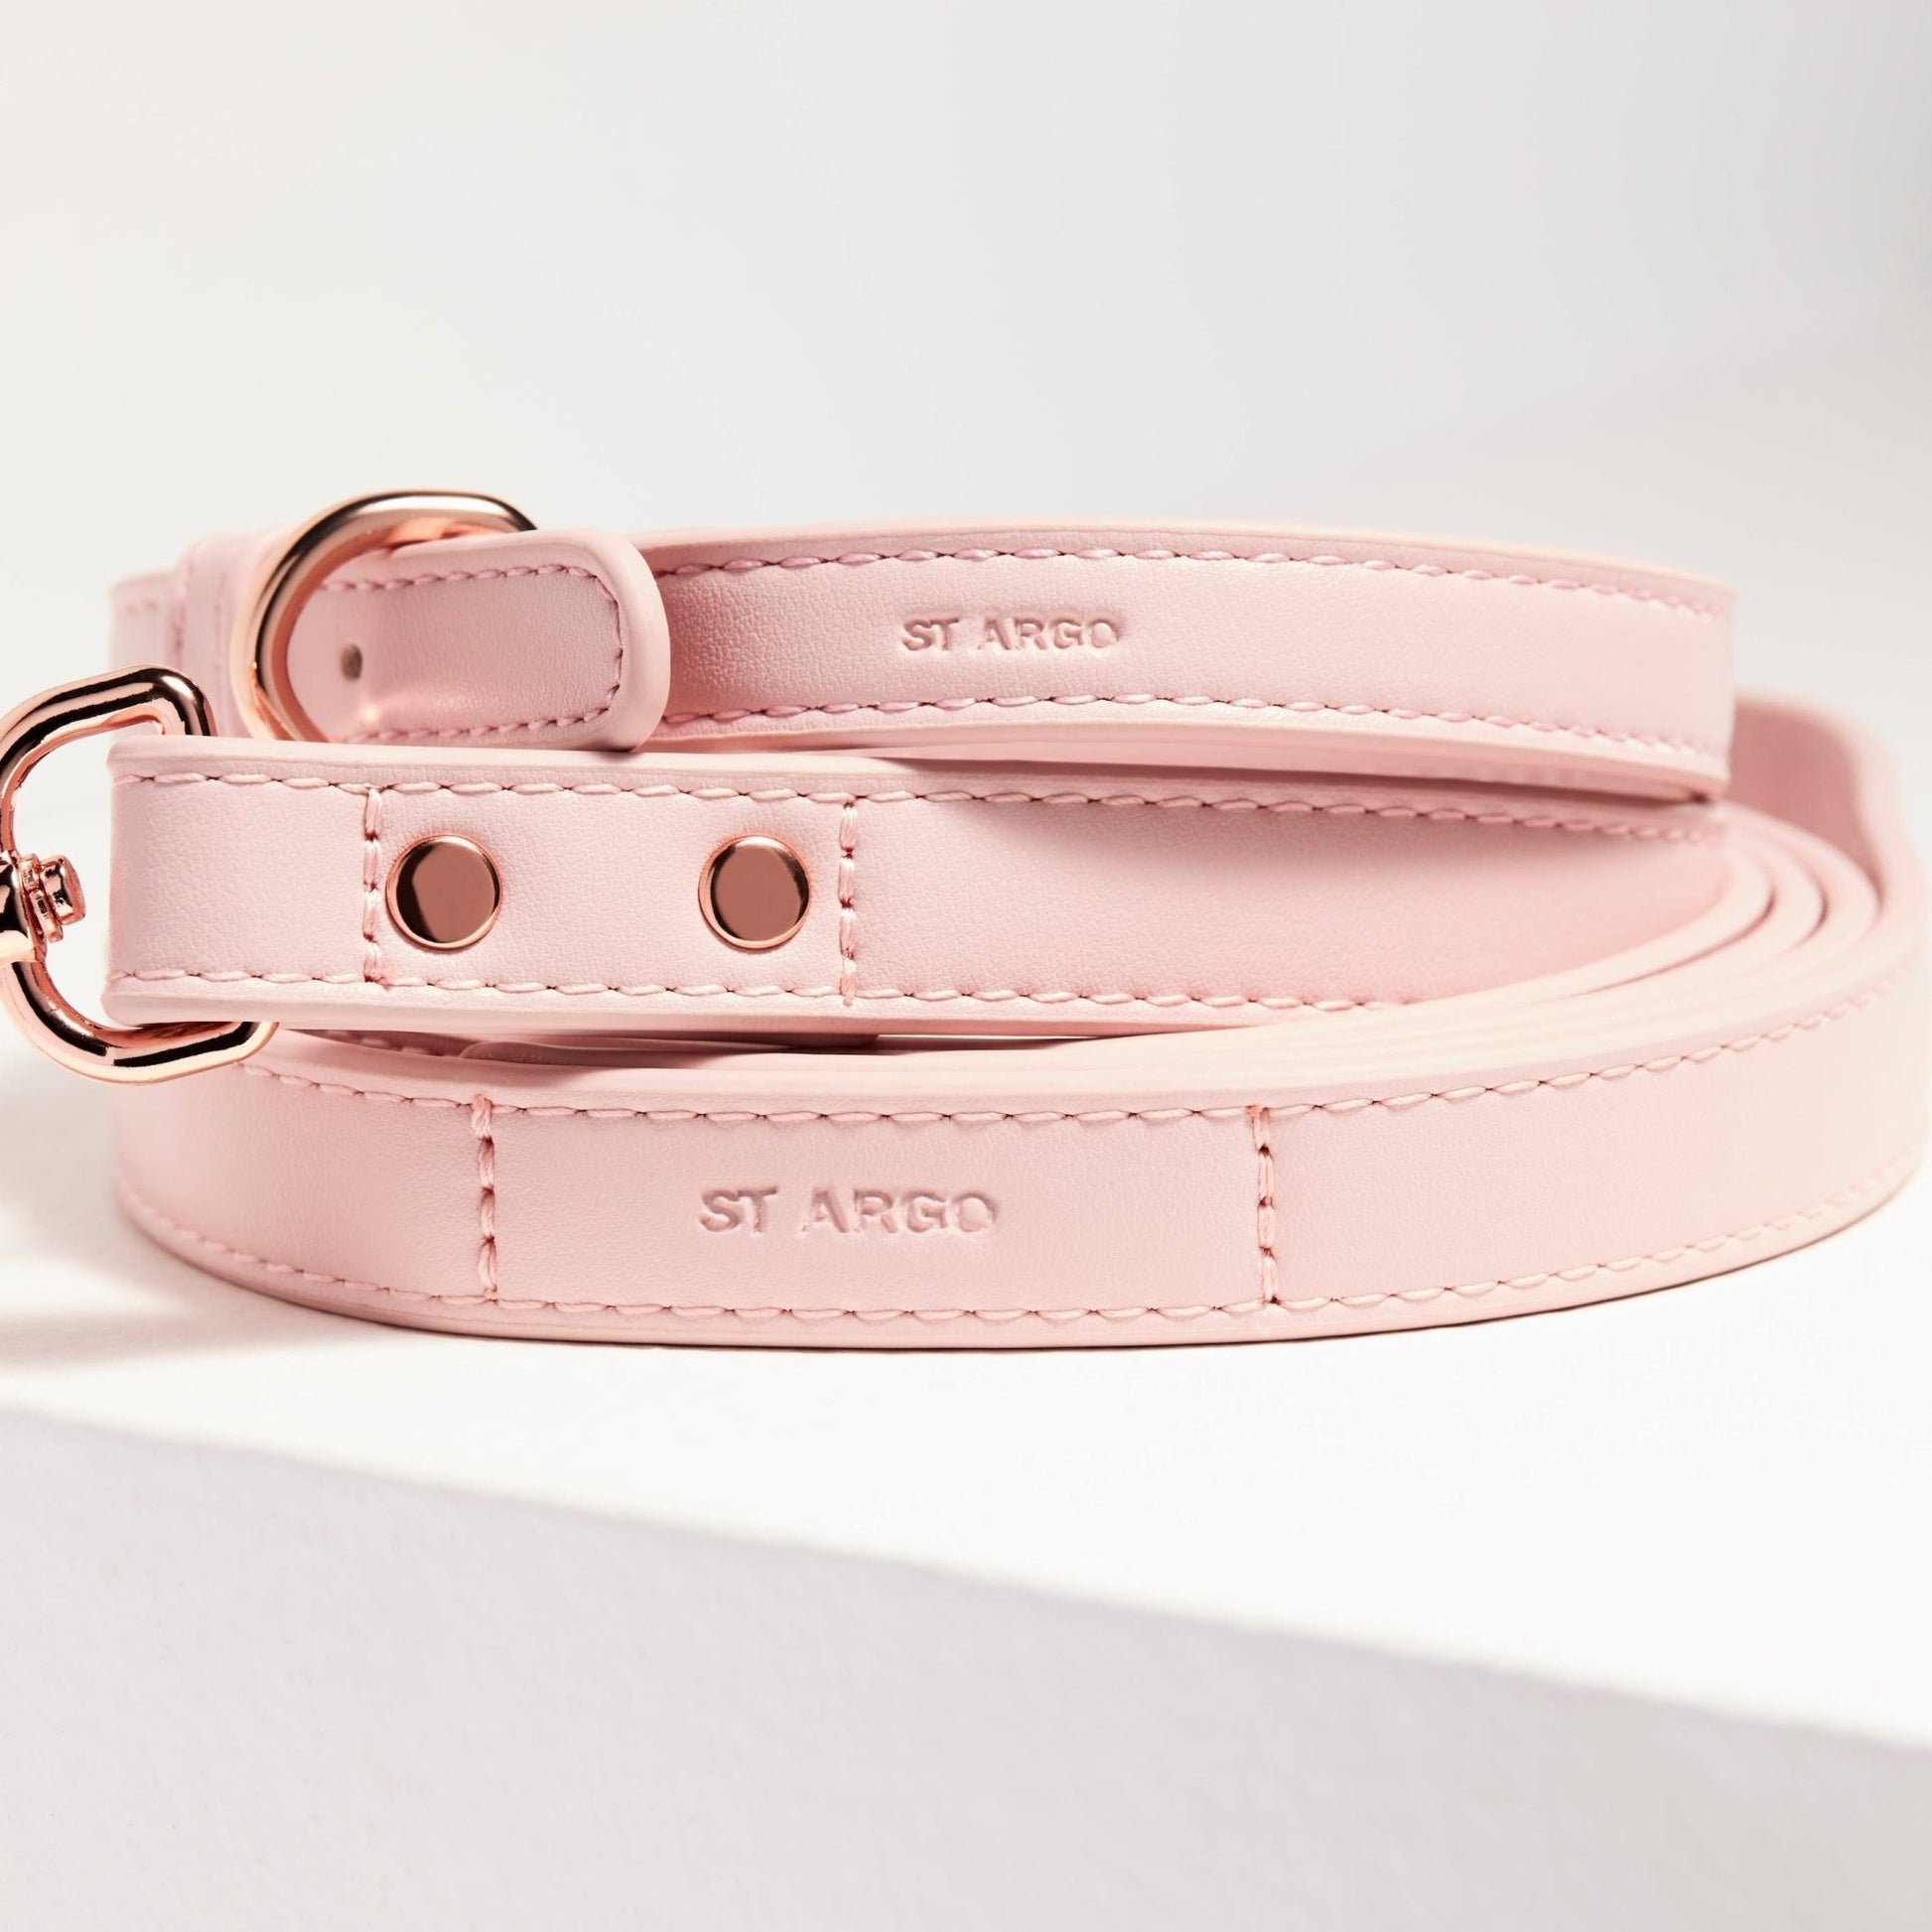 Pale pink vegan leather dog lead with rose gold hardware